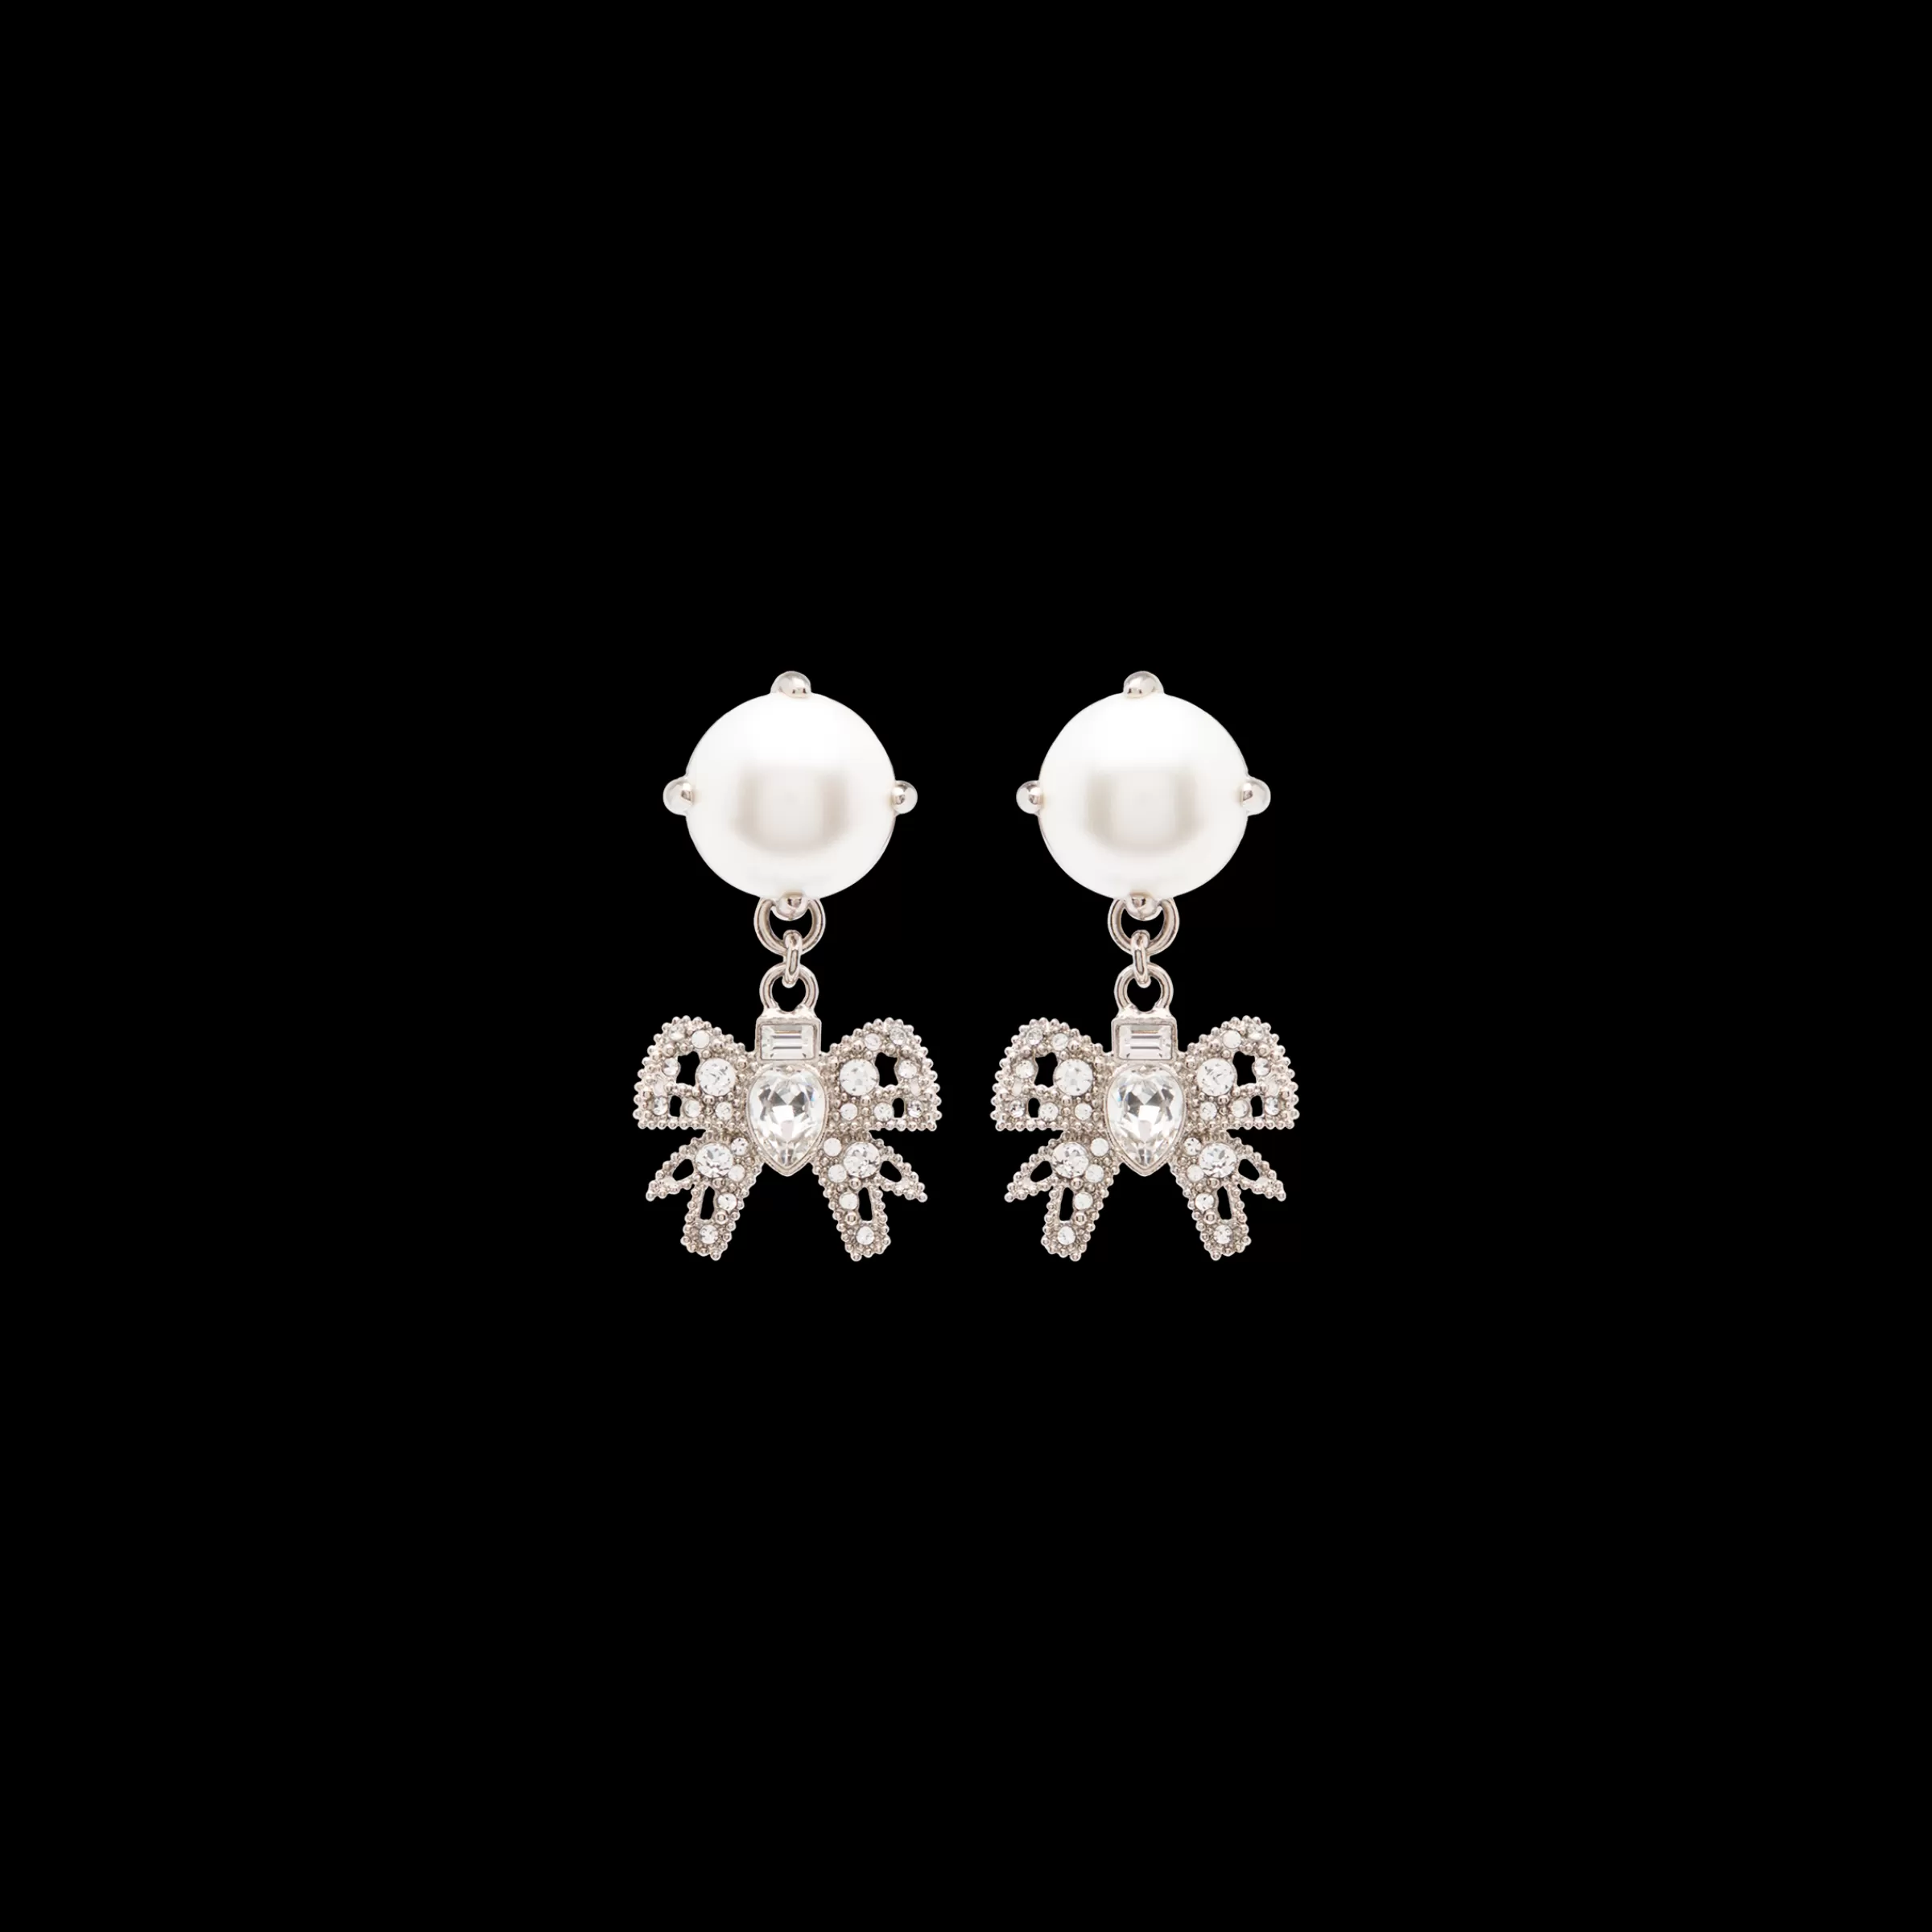 Miu Miu Cream/cristal Pendant Earrings With Crystals And Pearls |